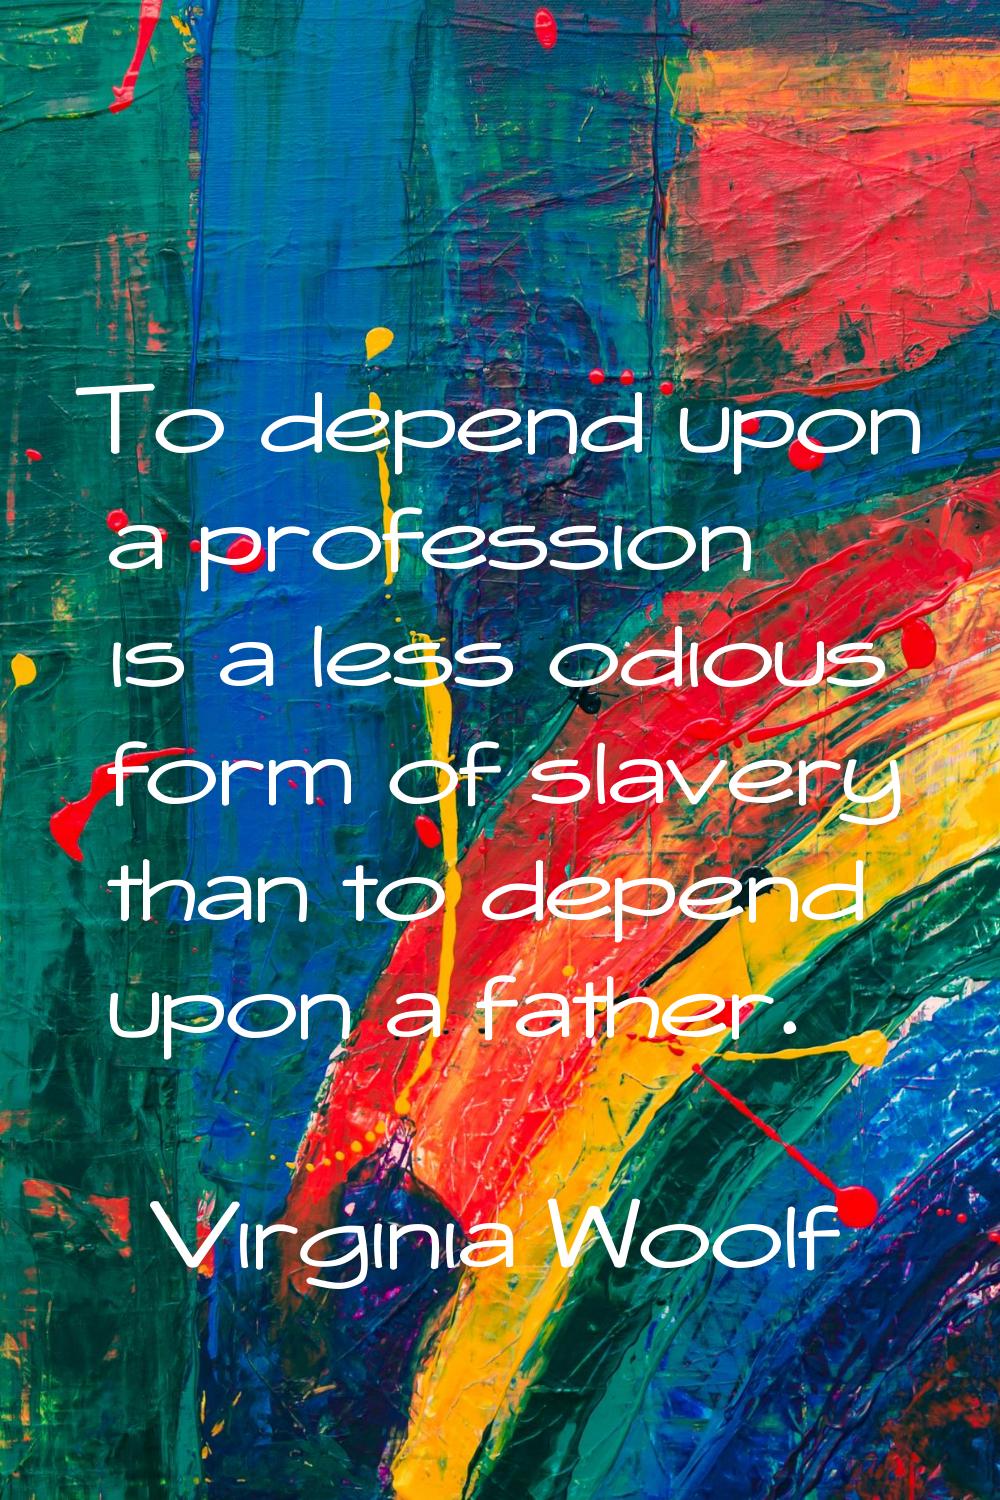 To depend upon a profession is a less odious form of slavery than to depend upon a father.